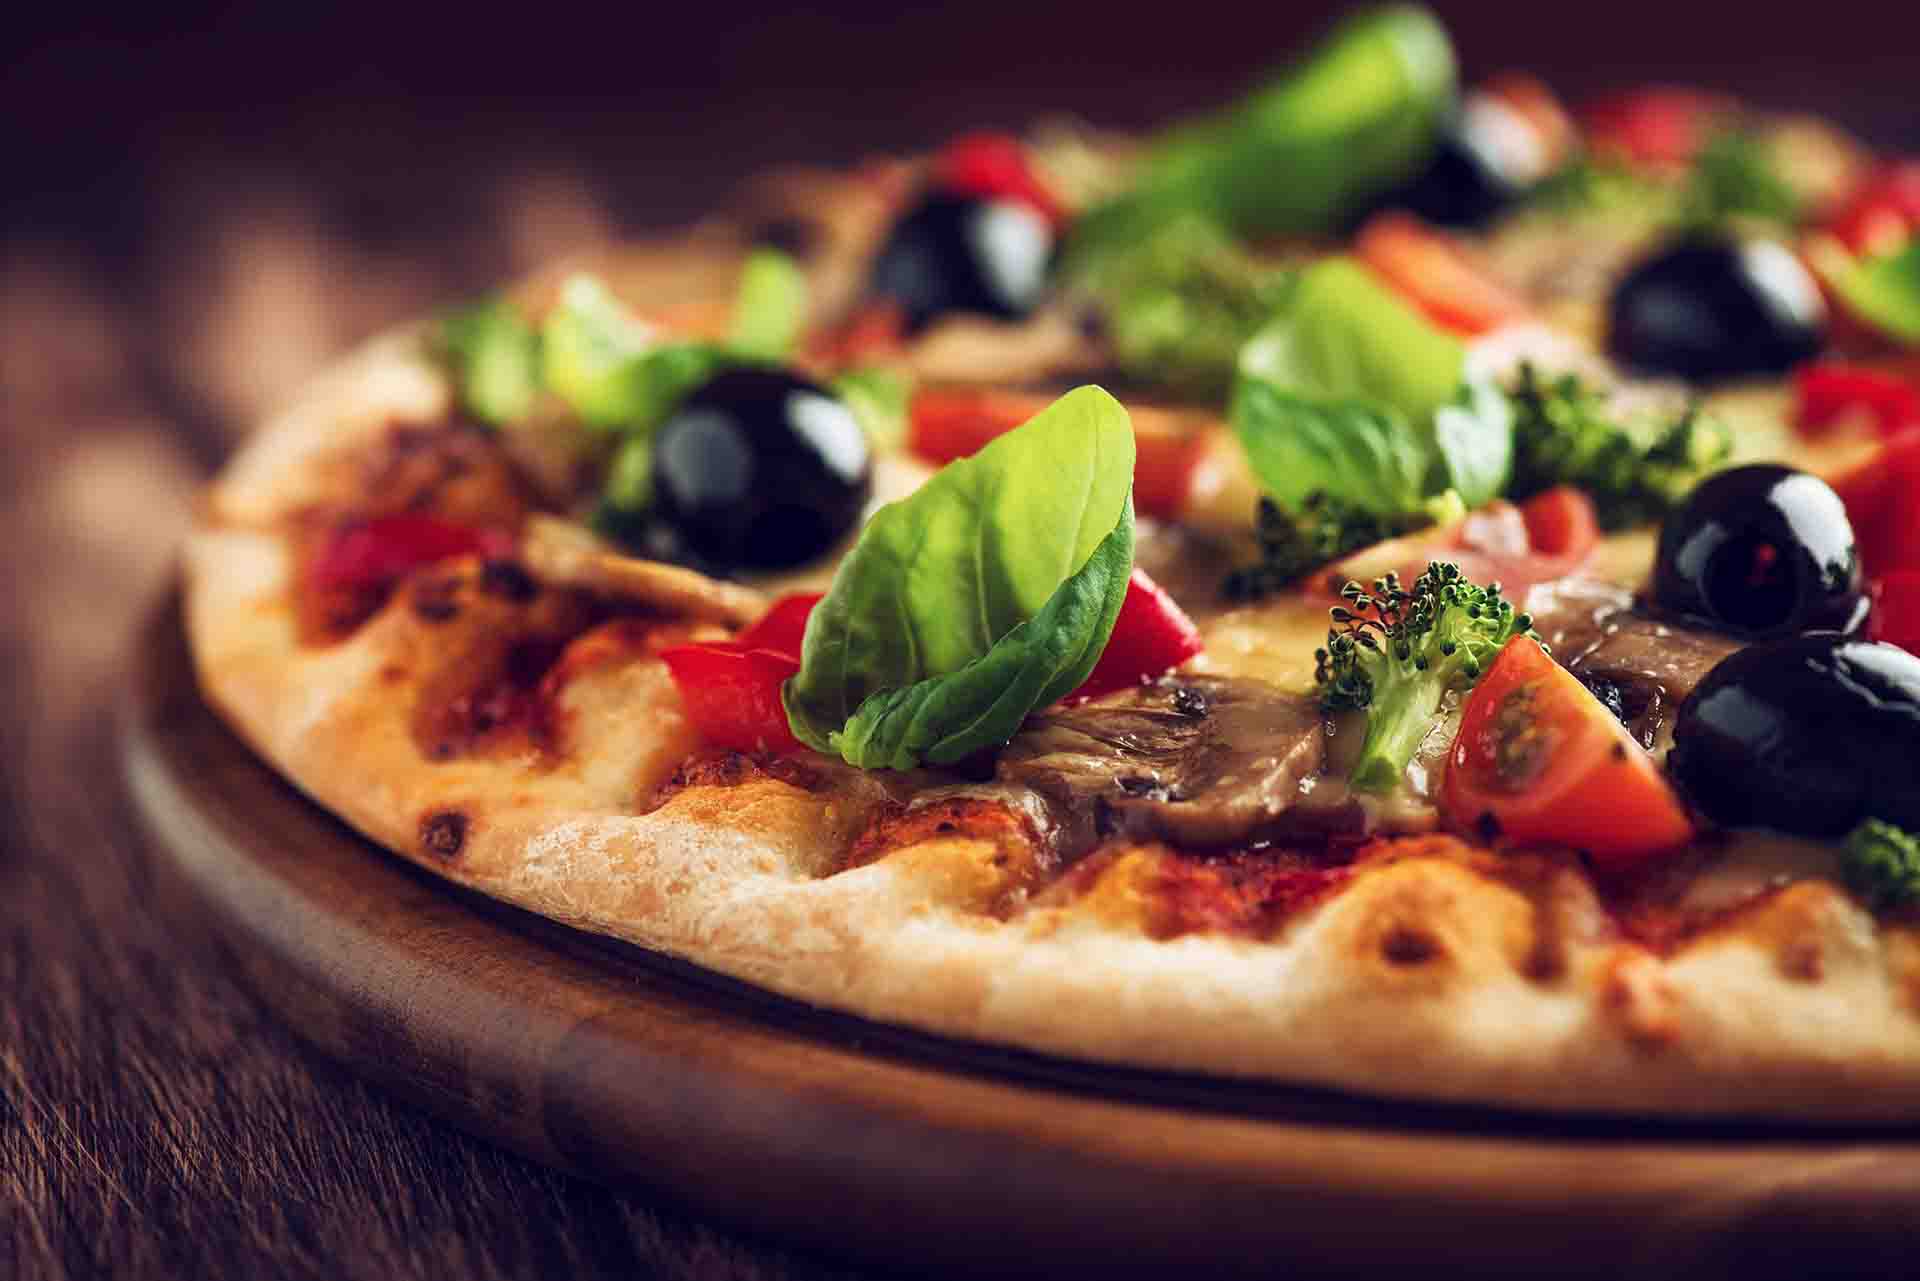 Vegetable pizza served with tomatoes, spinach, and olives